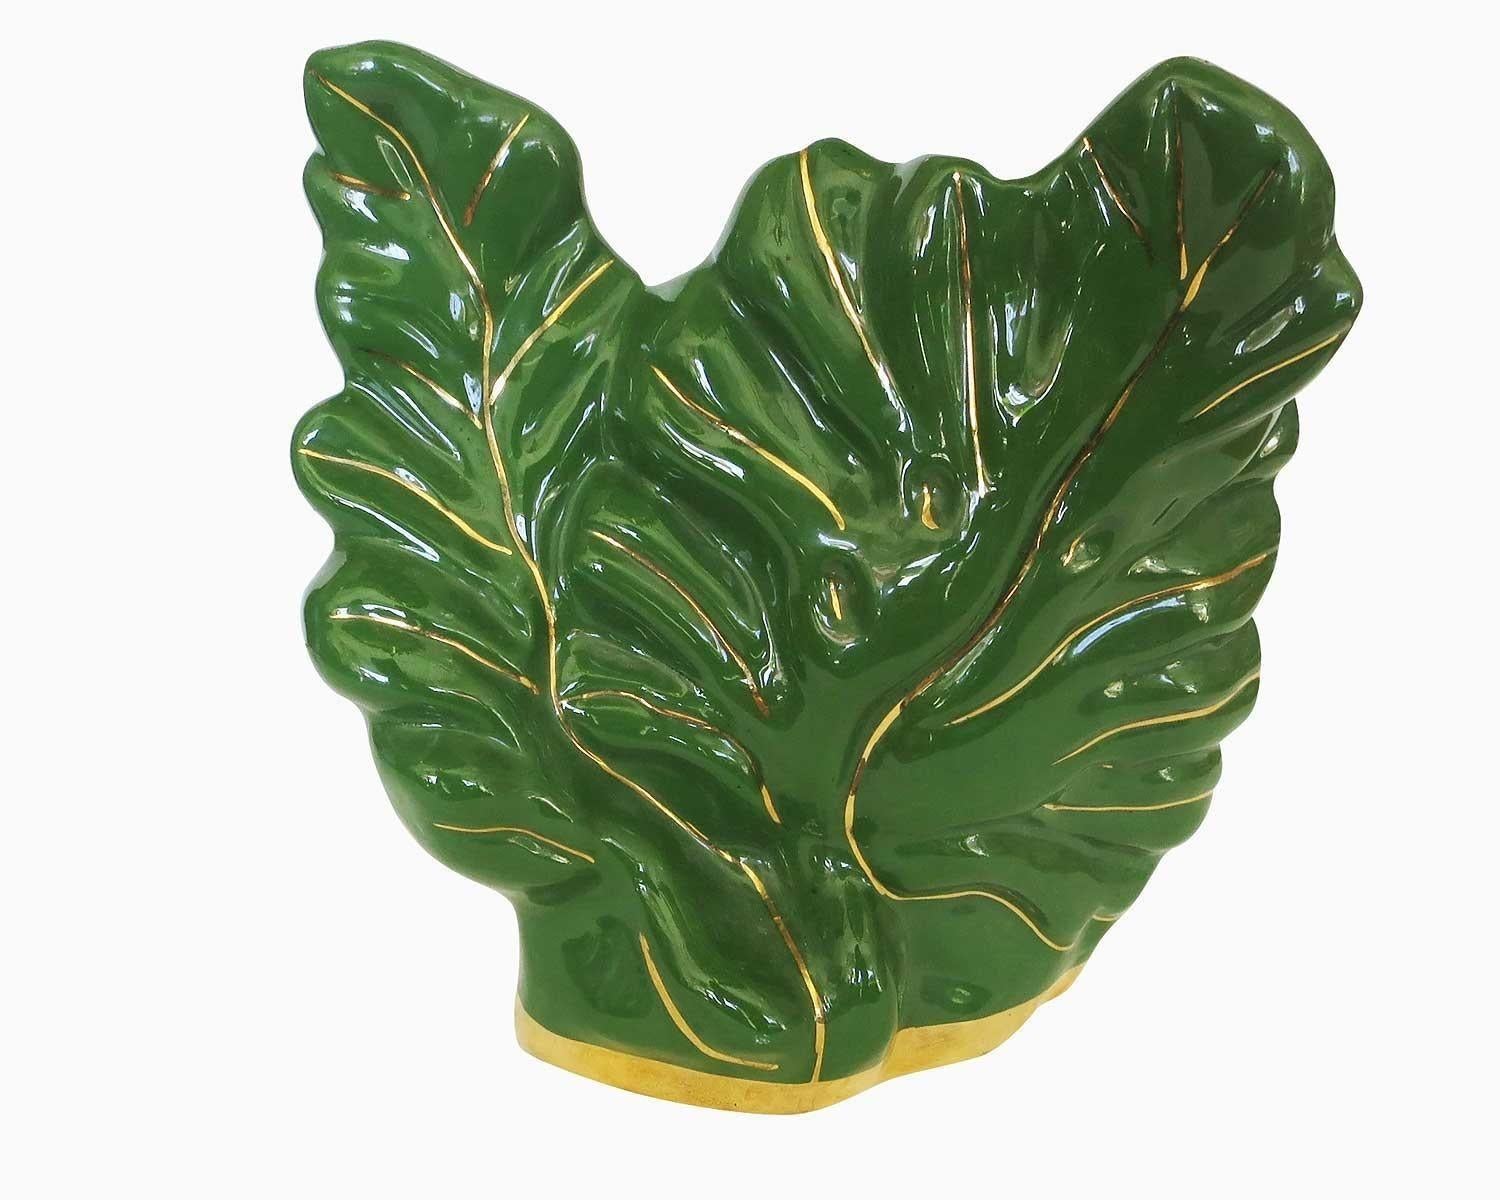 Mid-Century organic leaf esco-lite pottery TV lamp with green in a green glaze with gold accents.